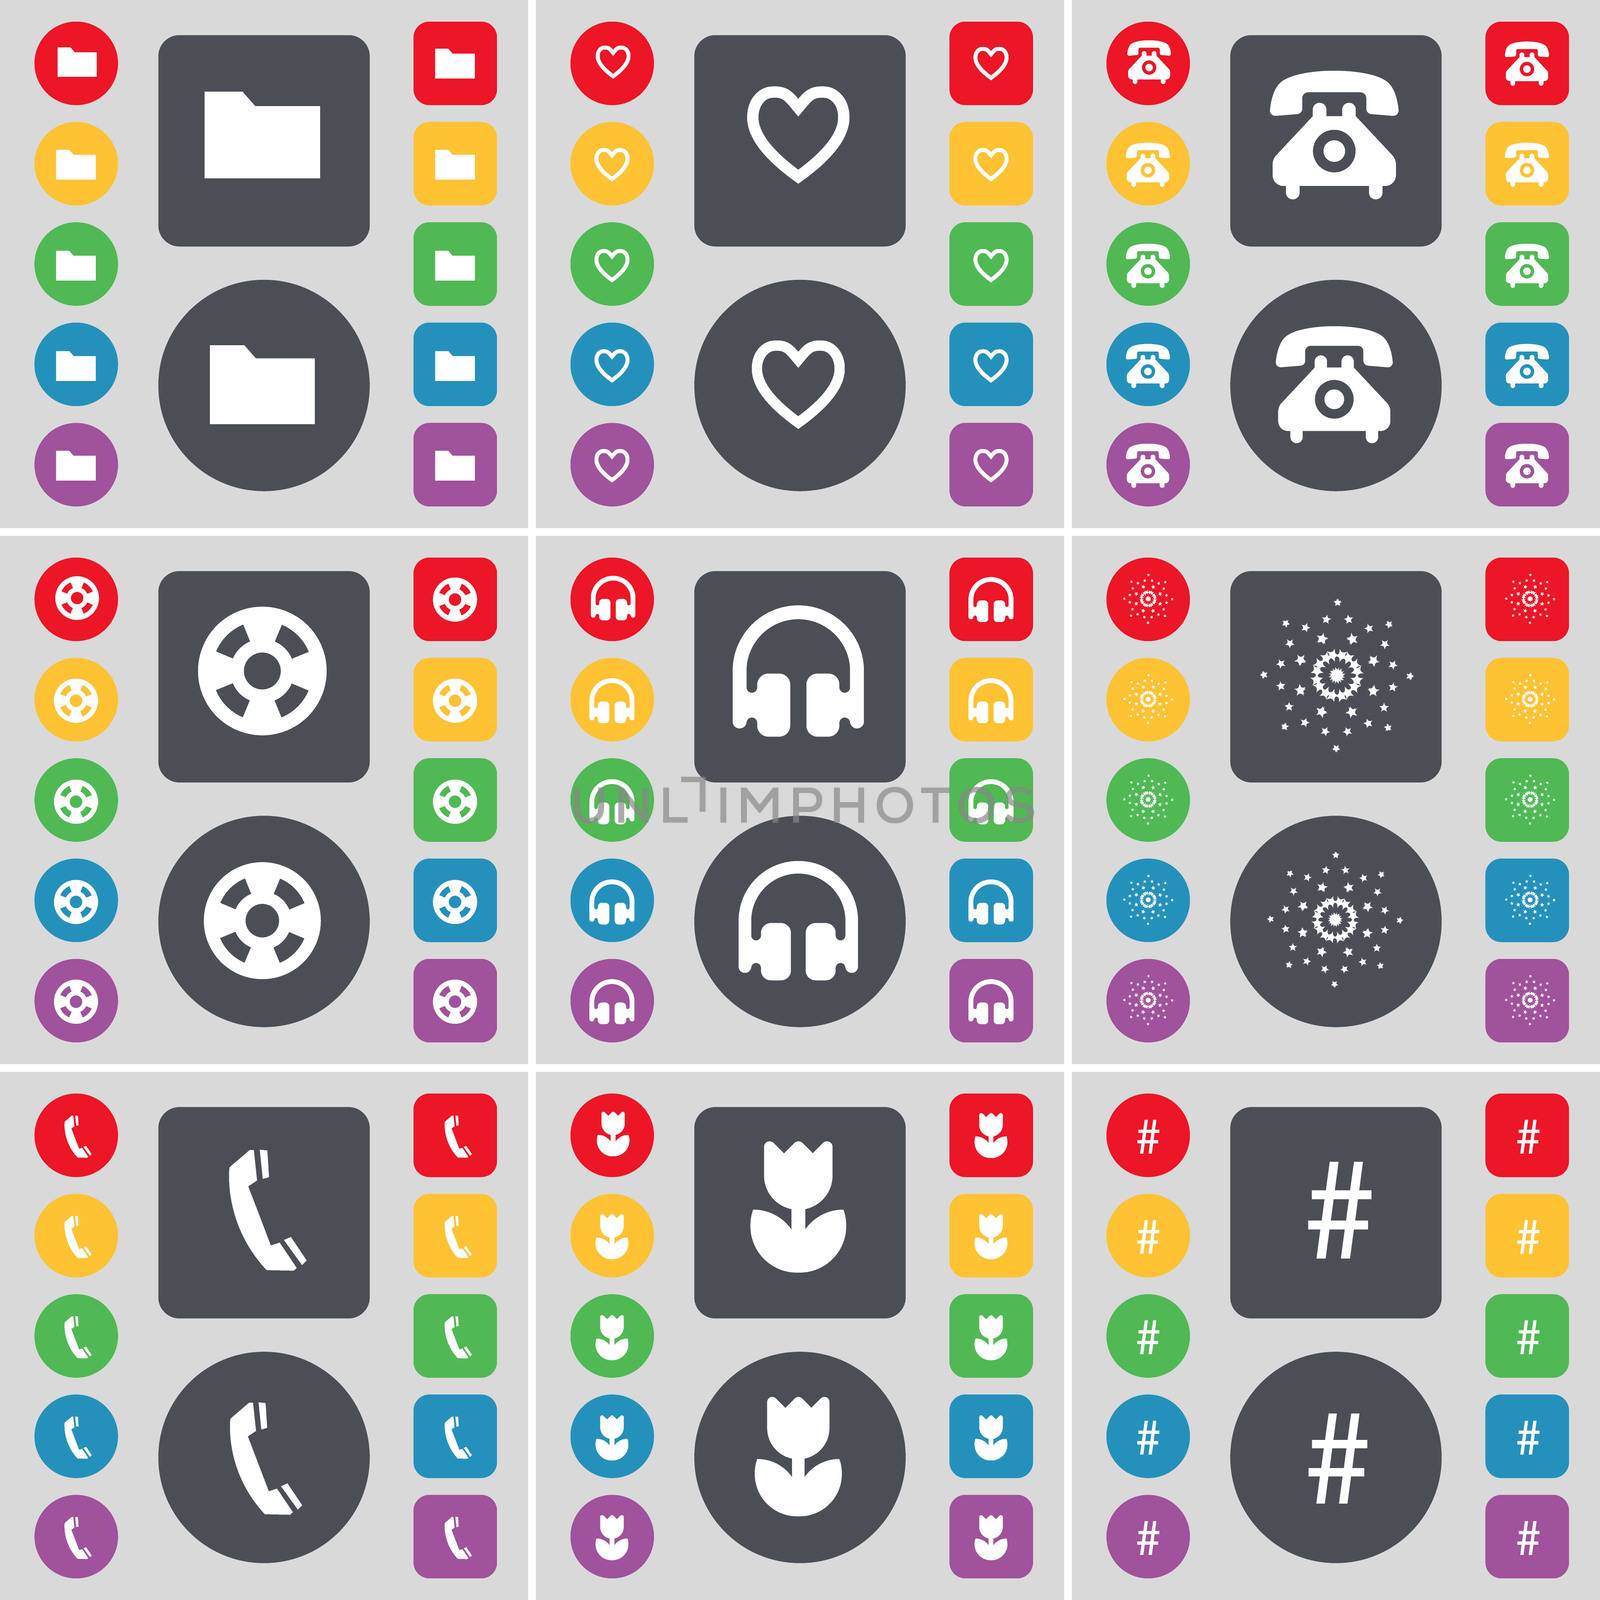 Folder, Heart, Retro phone, Videotape, Headphones, Star, Receiver, Flower, Hashtag icon symbol. A large set of flat, colored buttons for your design.  by serhii_lohvyniuk